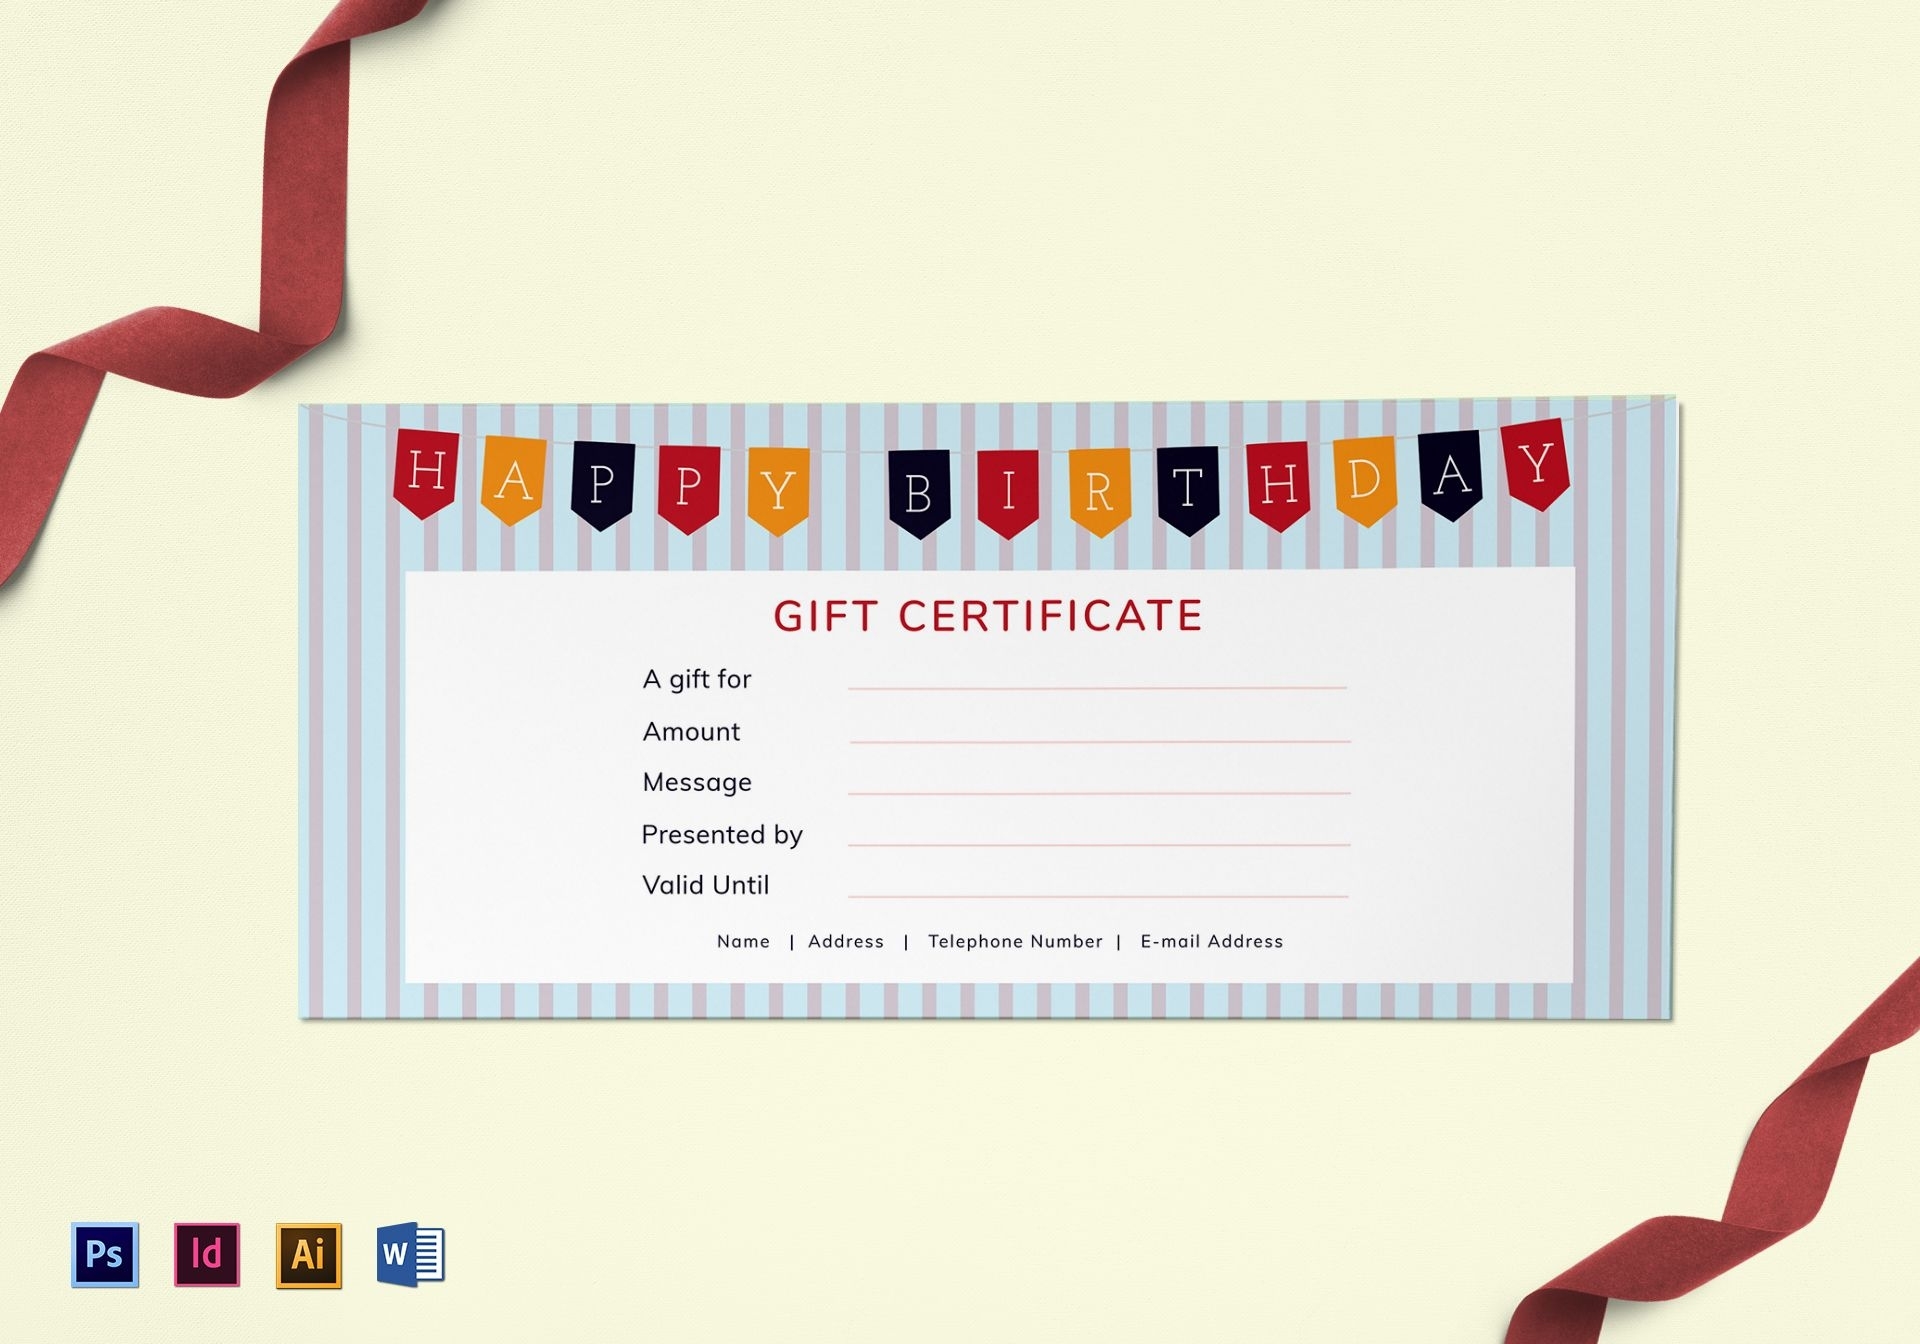 Happy Birthday Gift Certificate Design Template In Psd, Word Pertaining To Indesign Gift Certificate Template